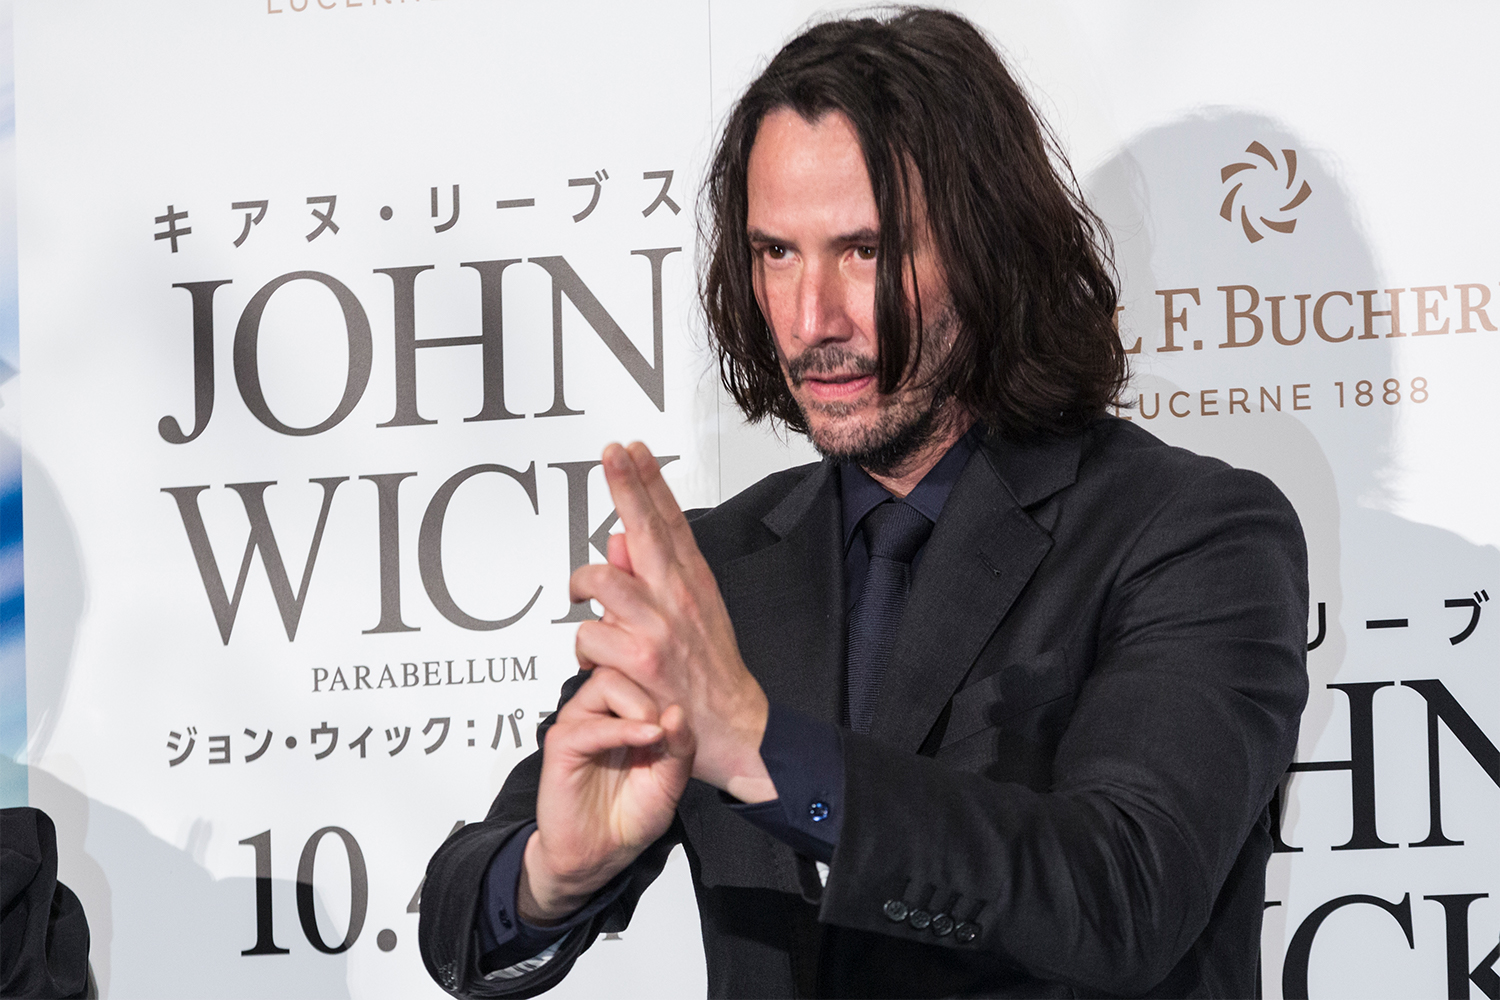 Actor Keanu Reeves at the John Wick premiere